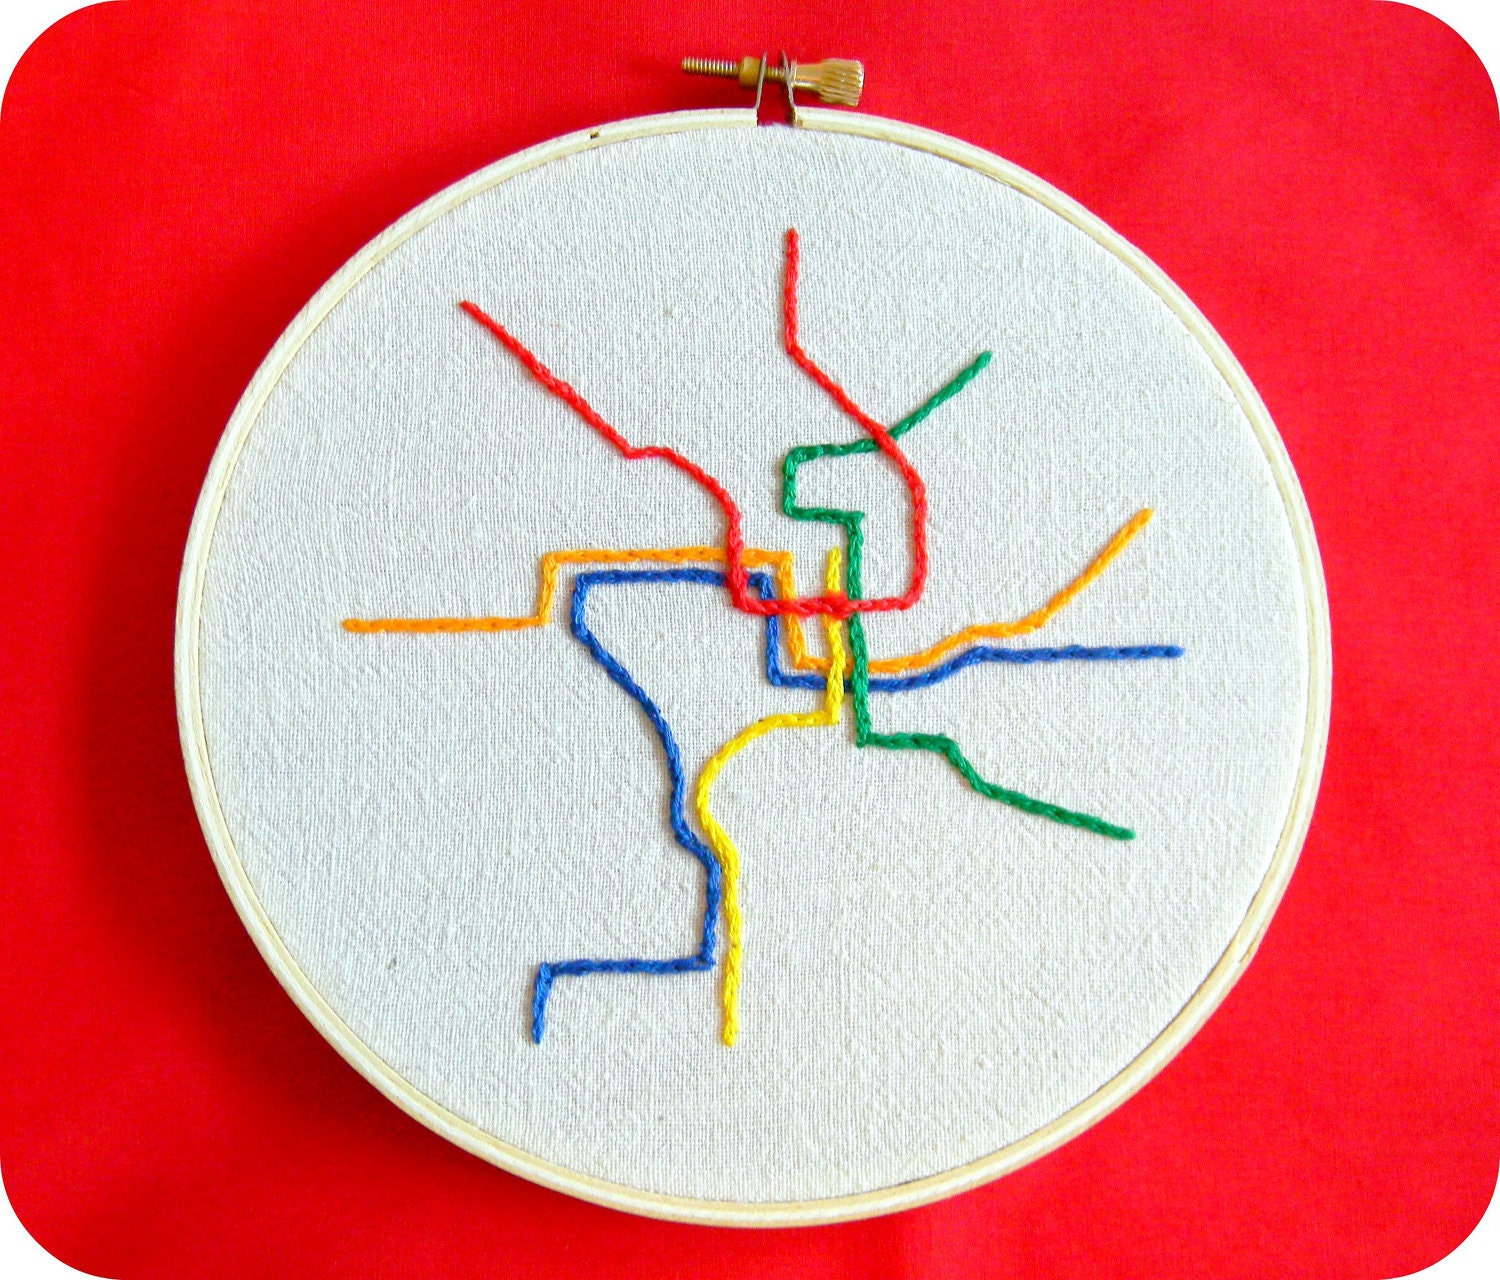 Washington DC Metro Map Embroidery Hoop Art. Hand Embroidered.